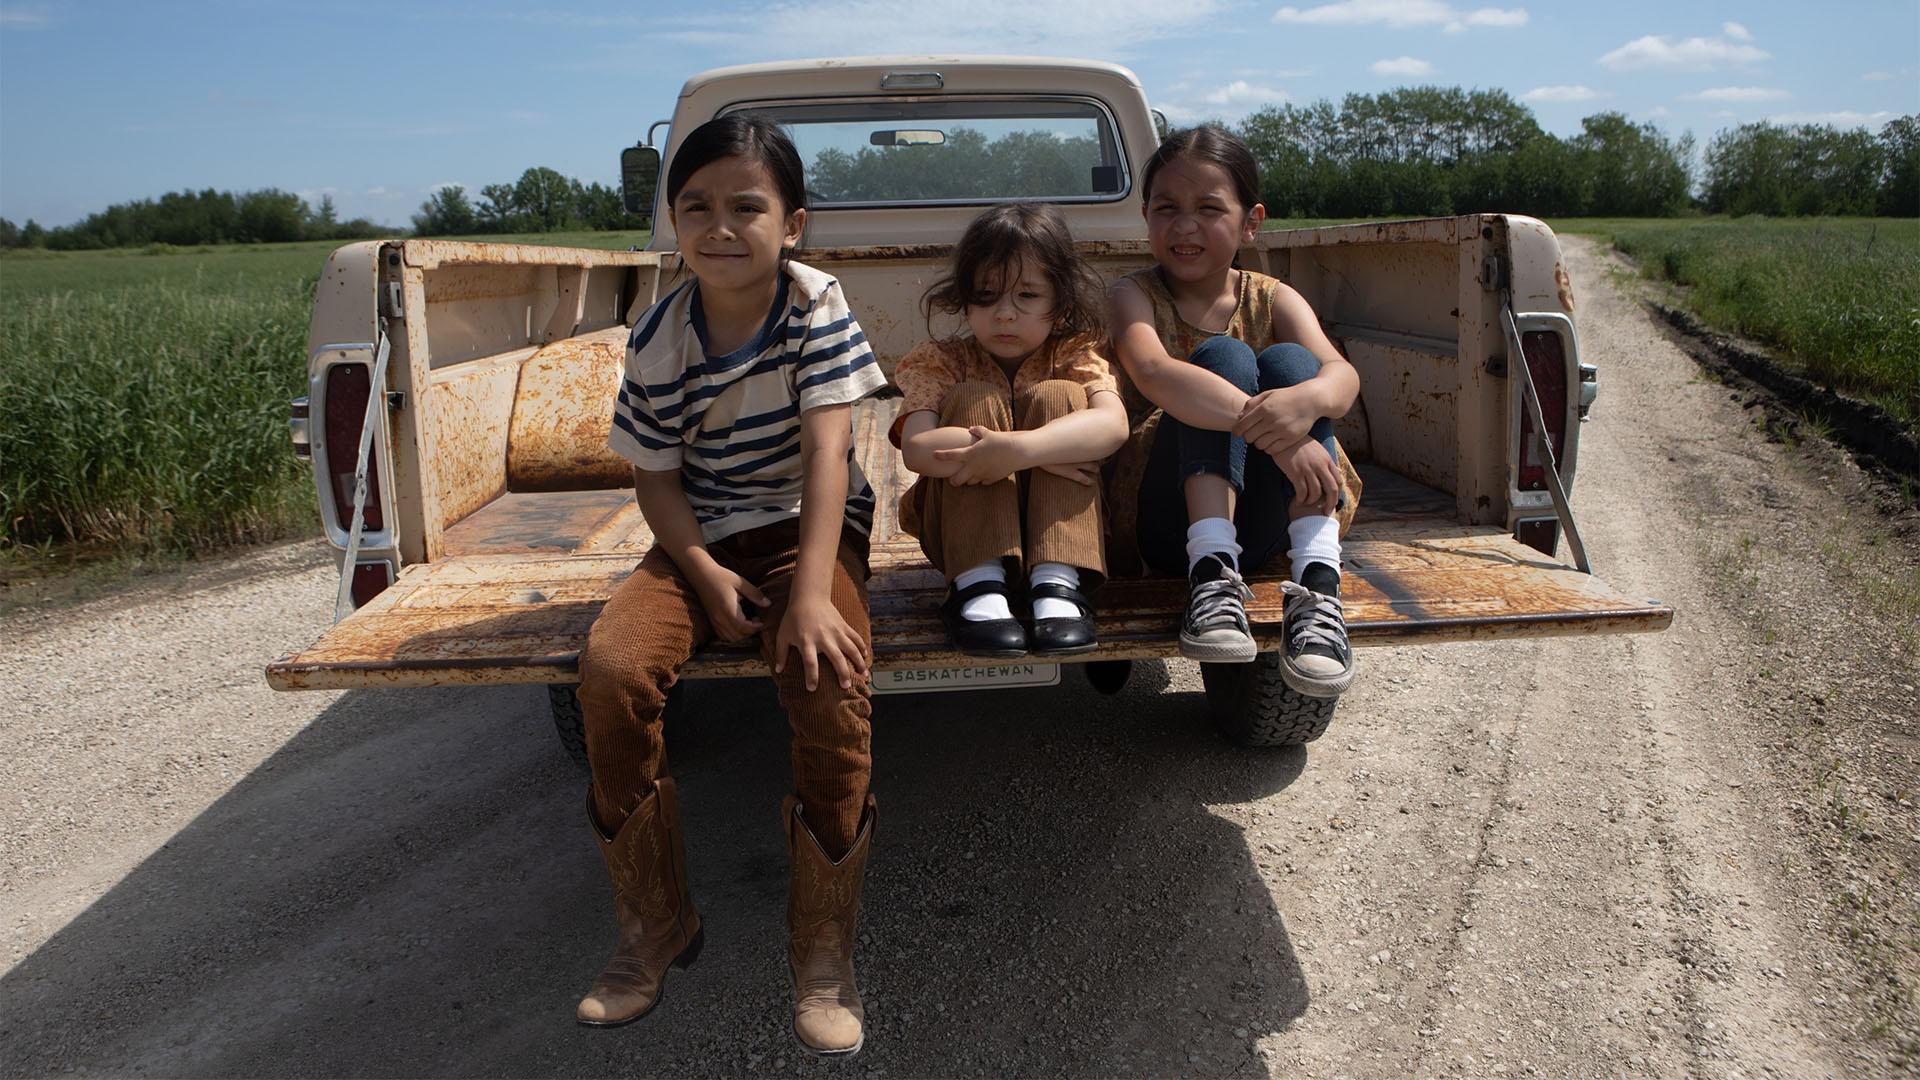 Young Niizh, young Dora, and young Bezhig sit on the back of a truck.